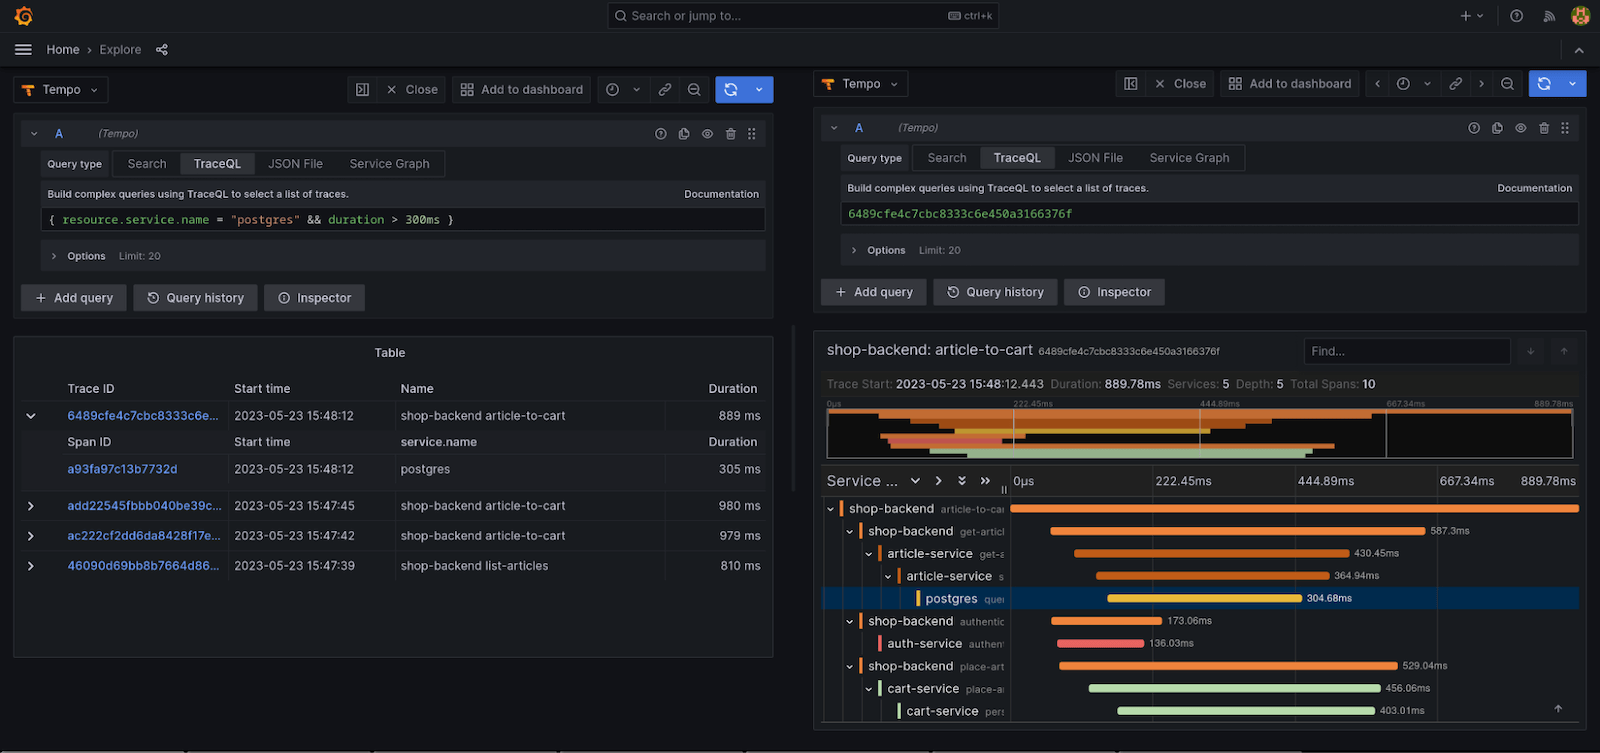 A screenshot of a Grafana dashboard with search results for traces using TraceQL